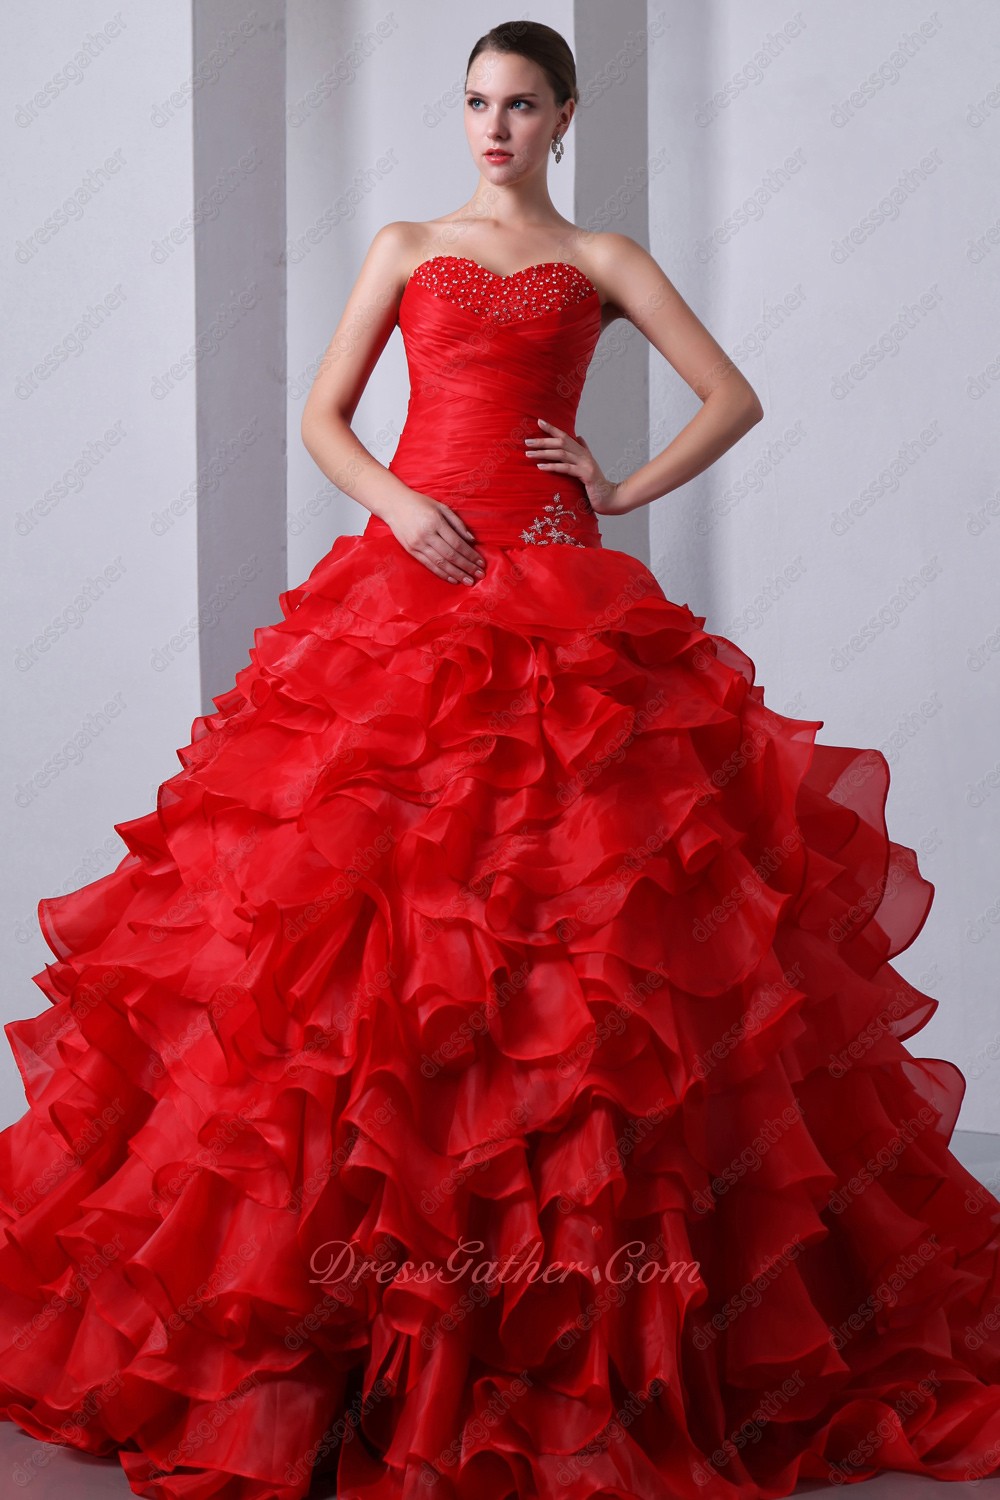 Sweetheart Red Ruffles Allure Quinceanera Gown Dress With Underskirt Make Fluffy - Click Image to Close